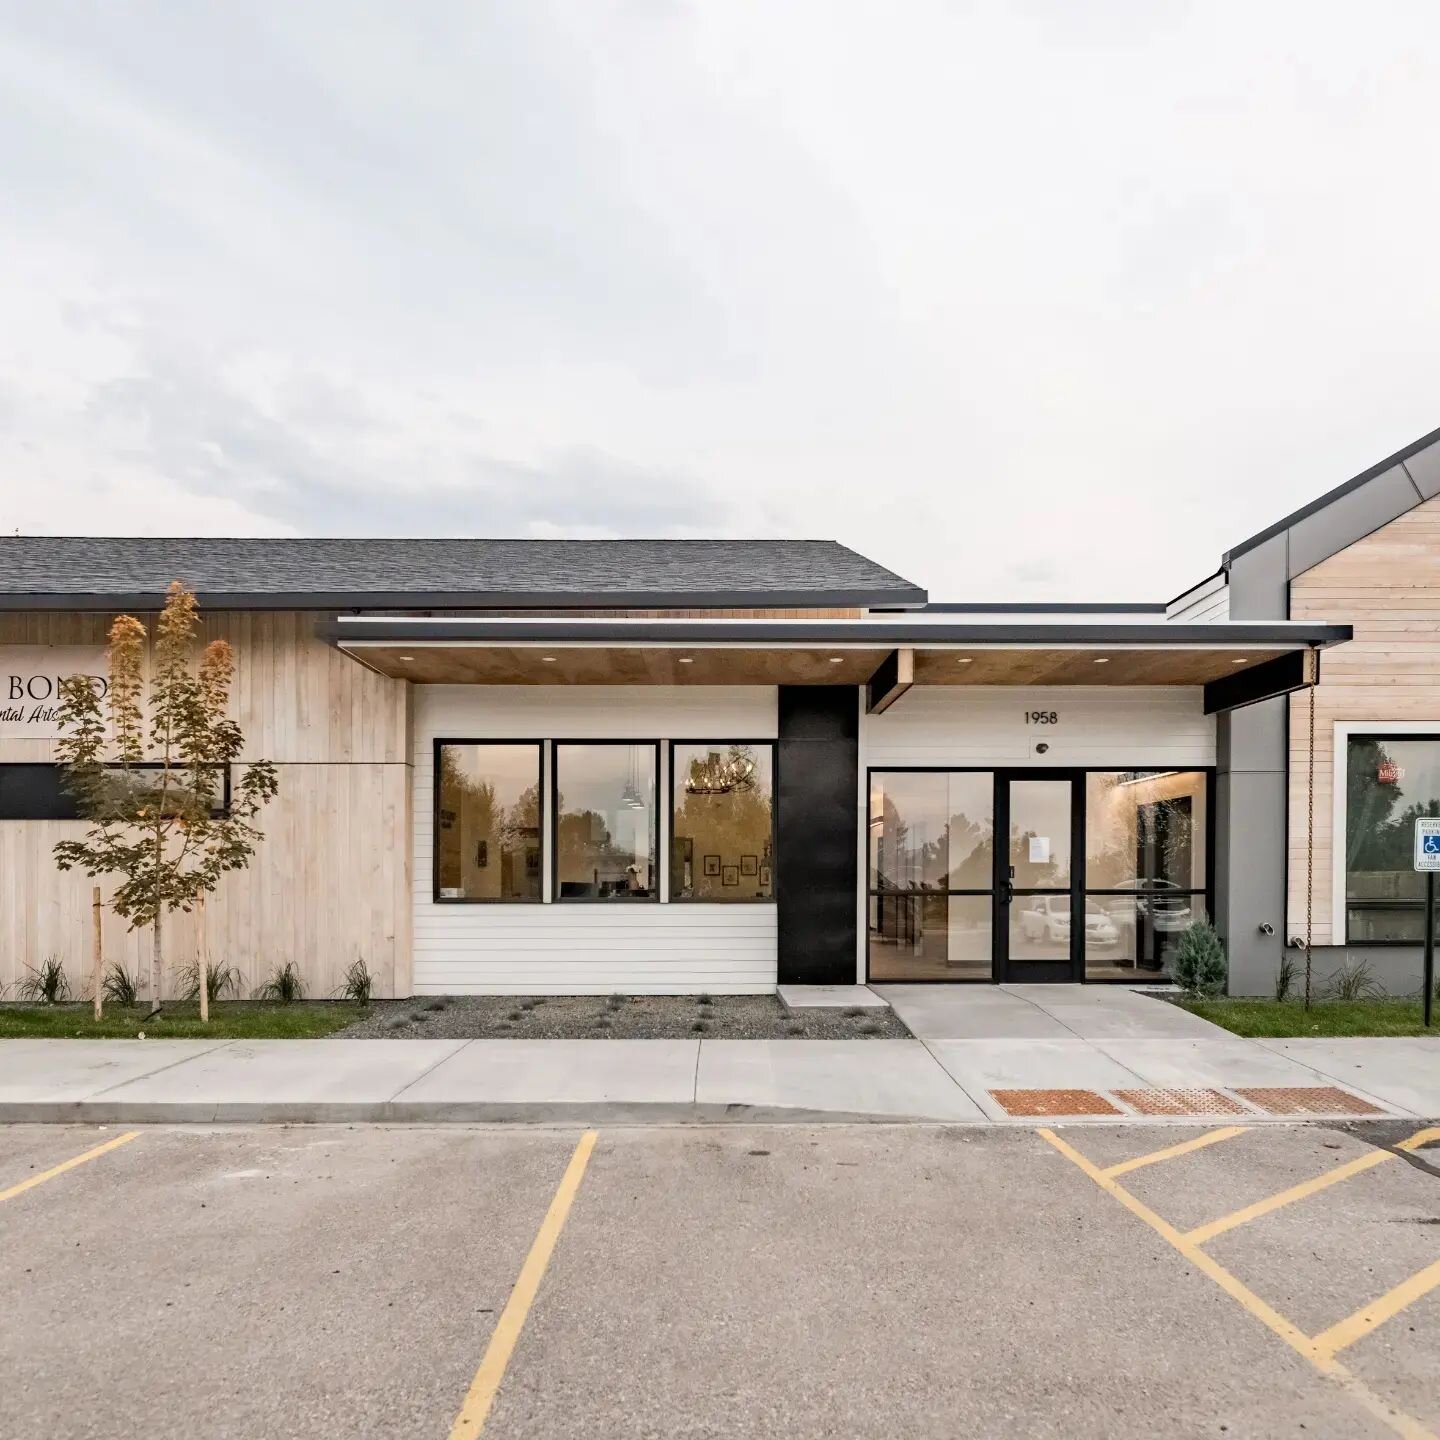 Bond Dental boasts warm interiors that are spacious and comfortable with tall ceilings and wood detailing throughout.  The exterior plays up modernism with regional form making.

#dentistarchitecture #dentistarchitect #freshdesign #fresharchitecture 